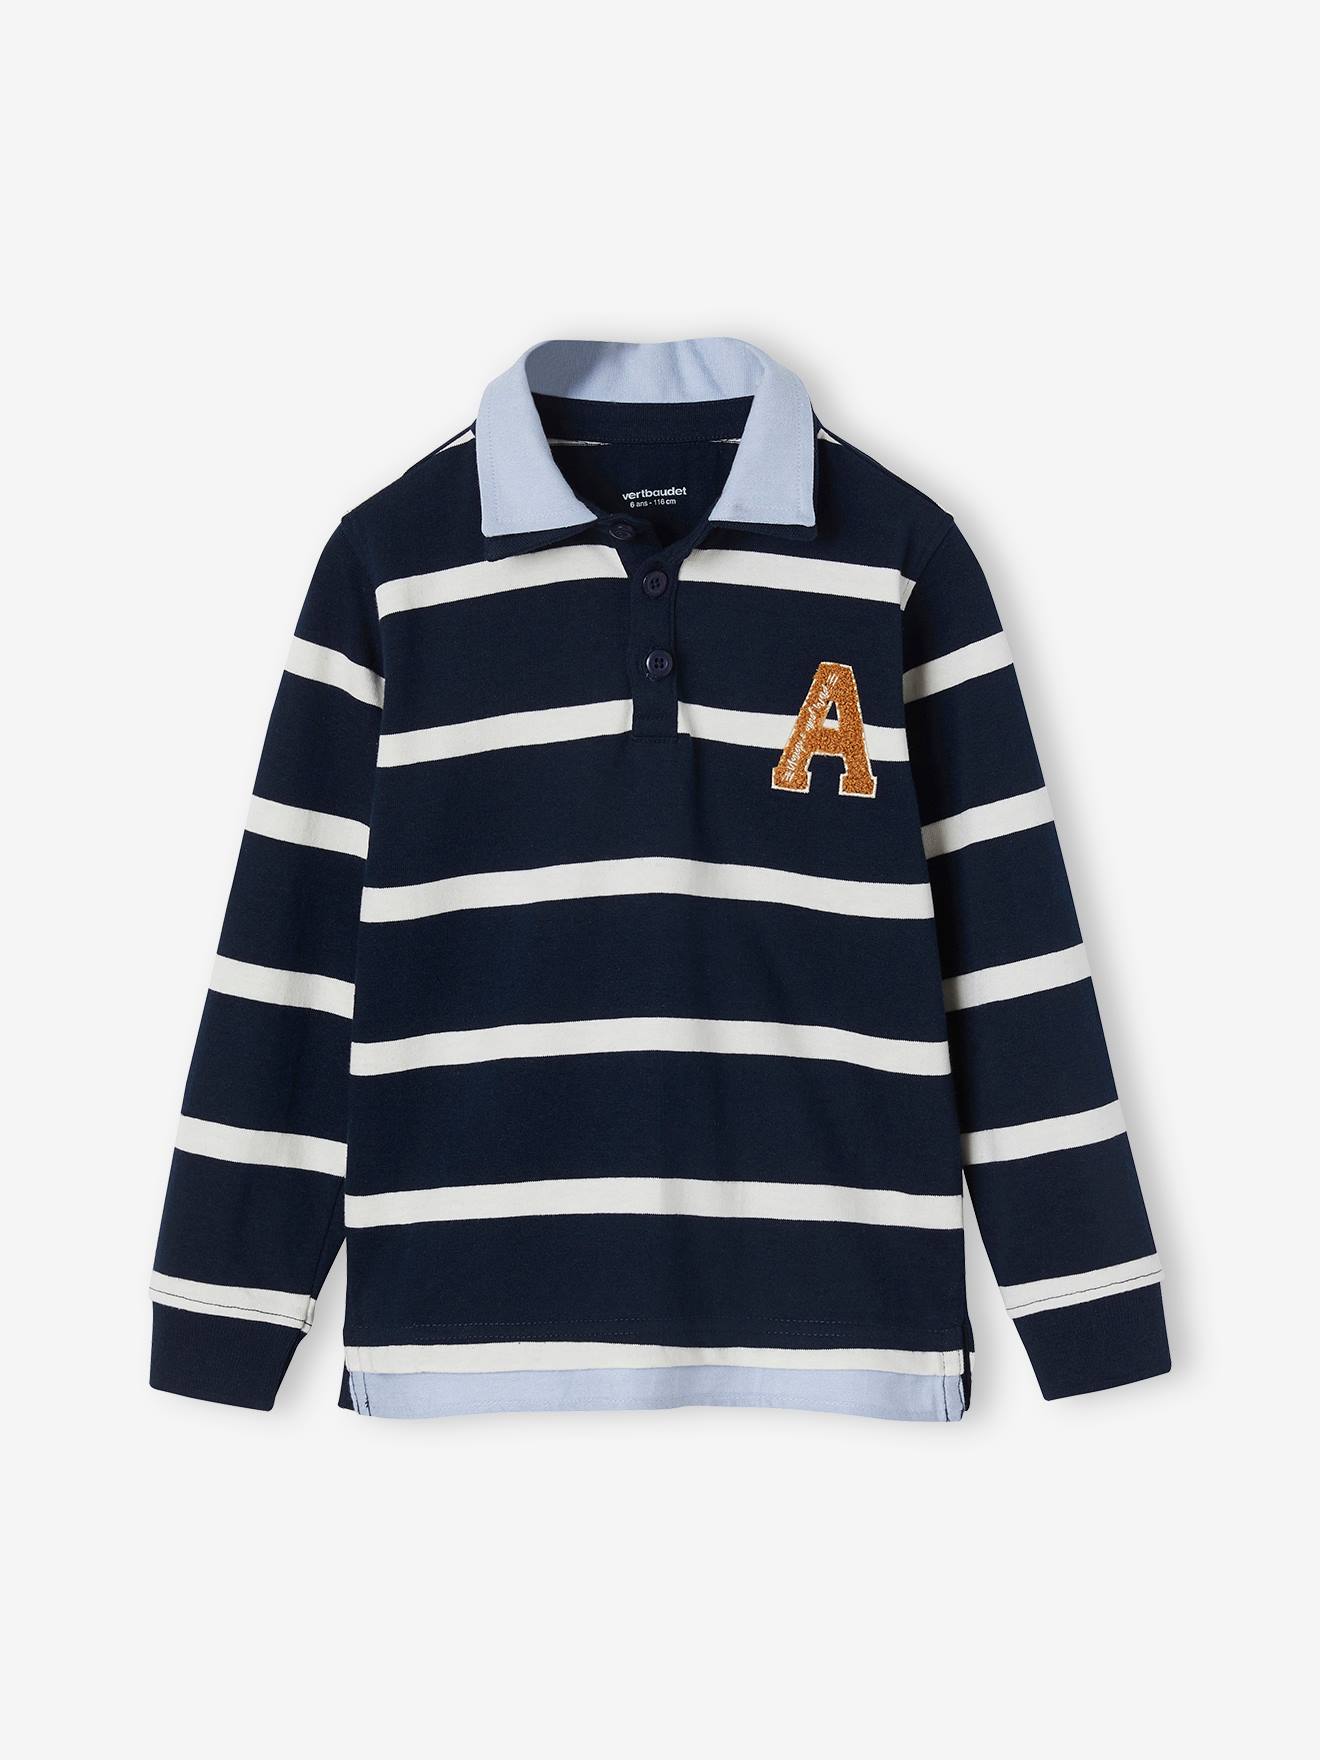 Striped 2-in-1 Effect Polo Shirt, for Boys navy blue